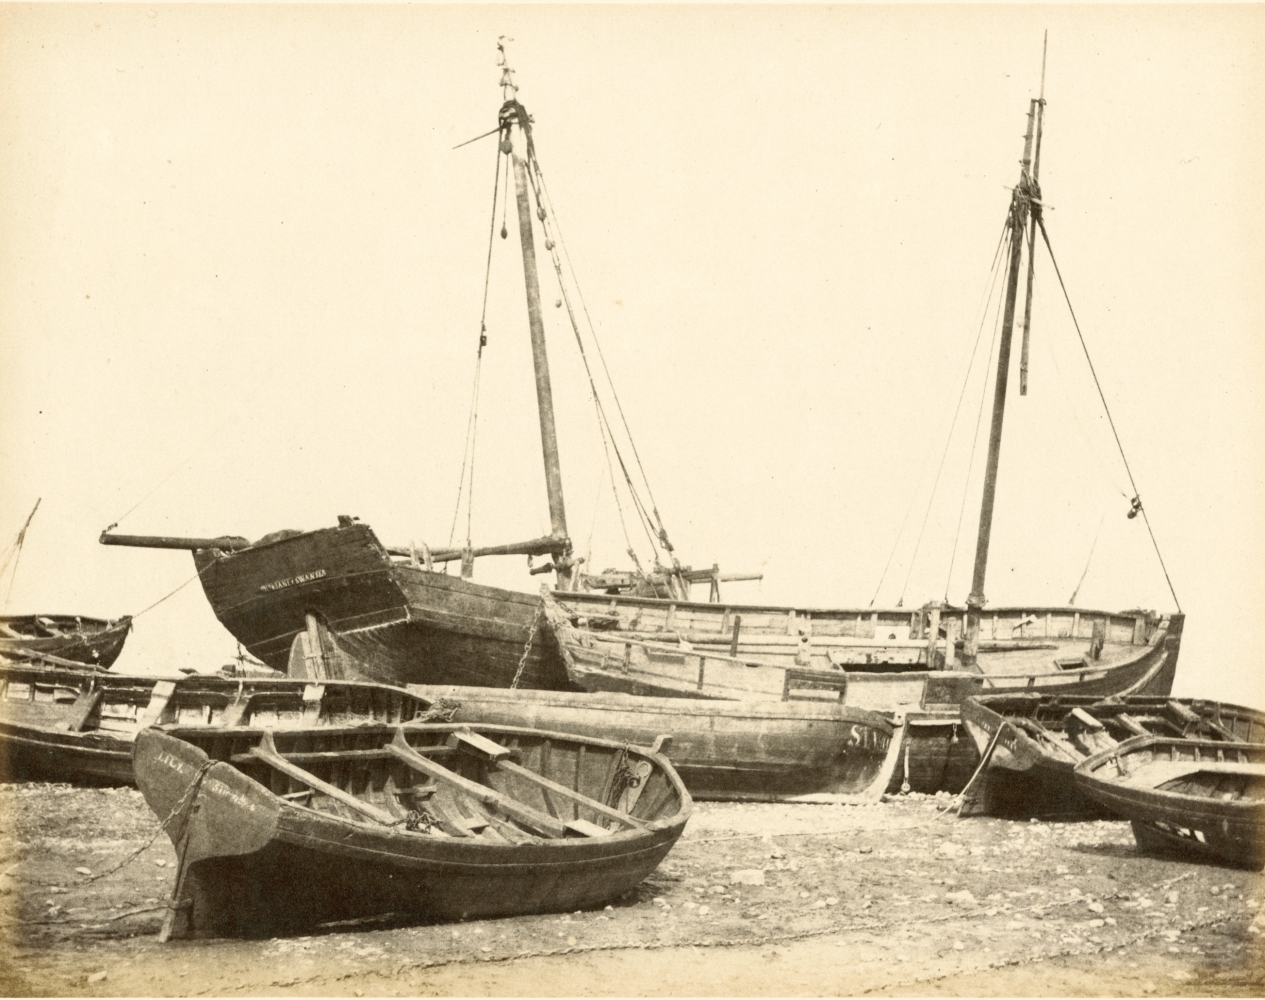 Hugh OWEN (English, 1808-1897) Oyster boats, Swansea Albumen print, 1860s-1870s, from a paper negative, before 1855 17.3 x 22.2 cm mounted on 26.0 x 28.3 cm album sheet Numbered "60" in pencil on mount